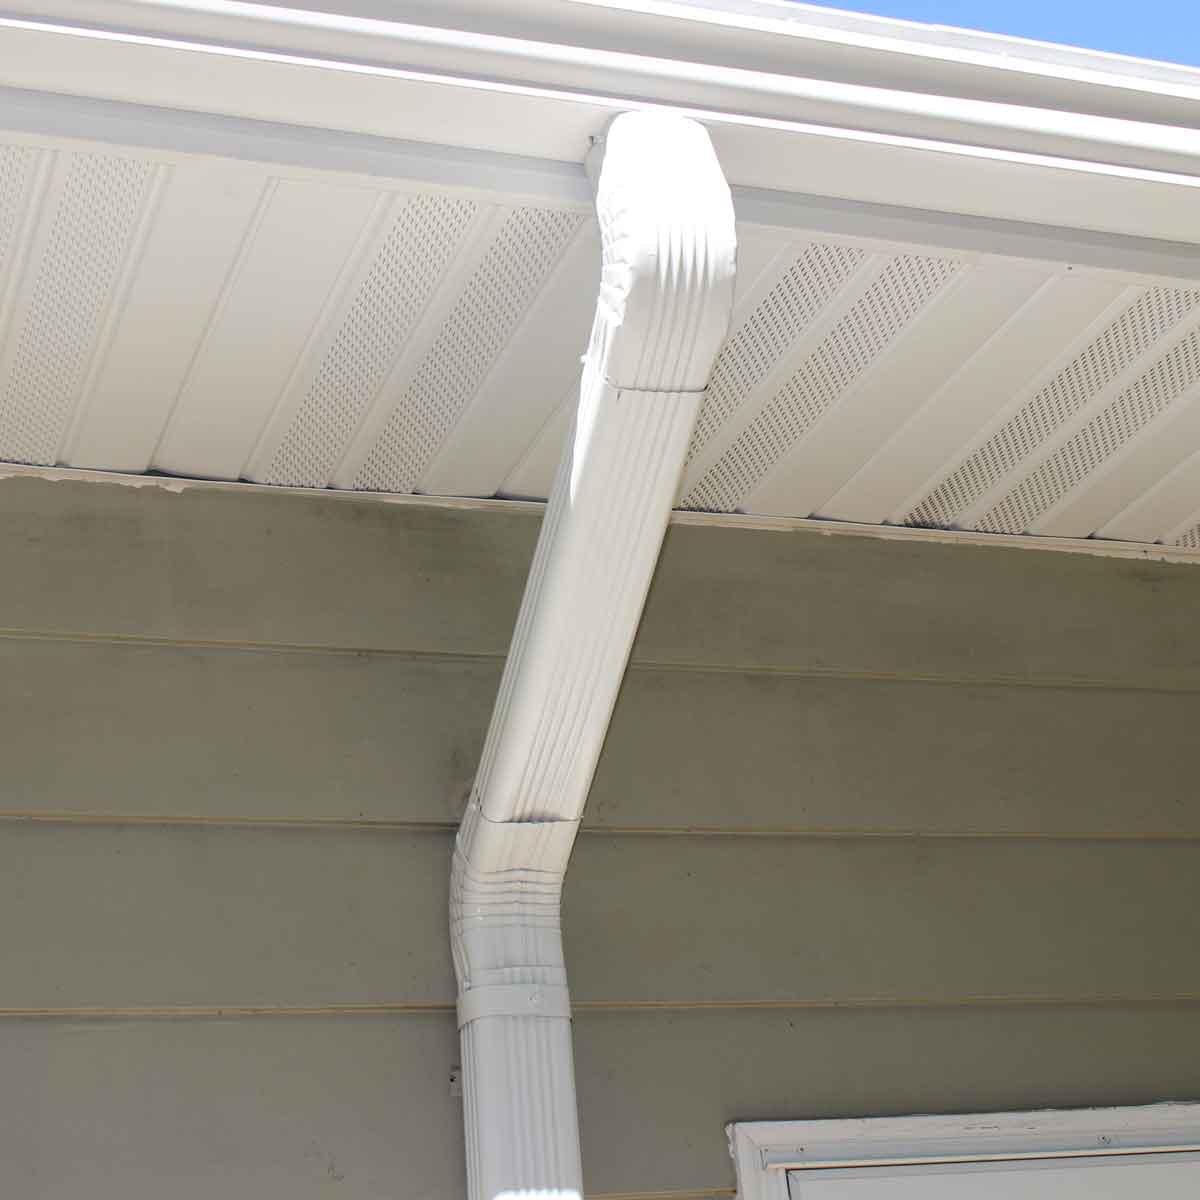 New installed Soffit